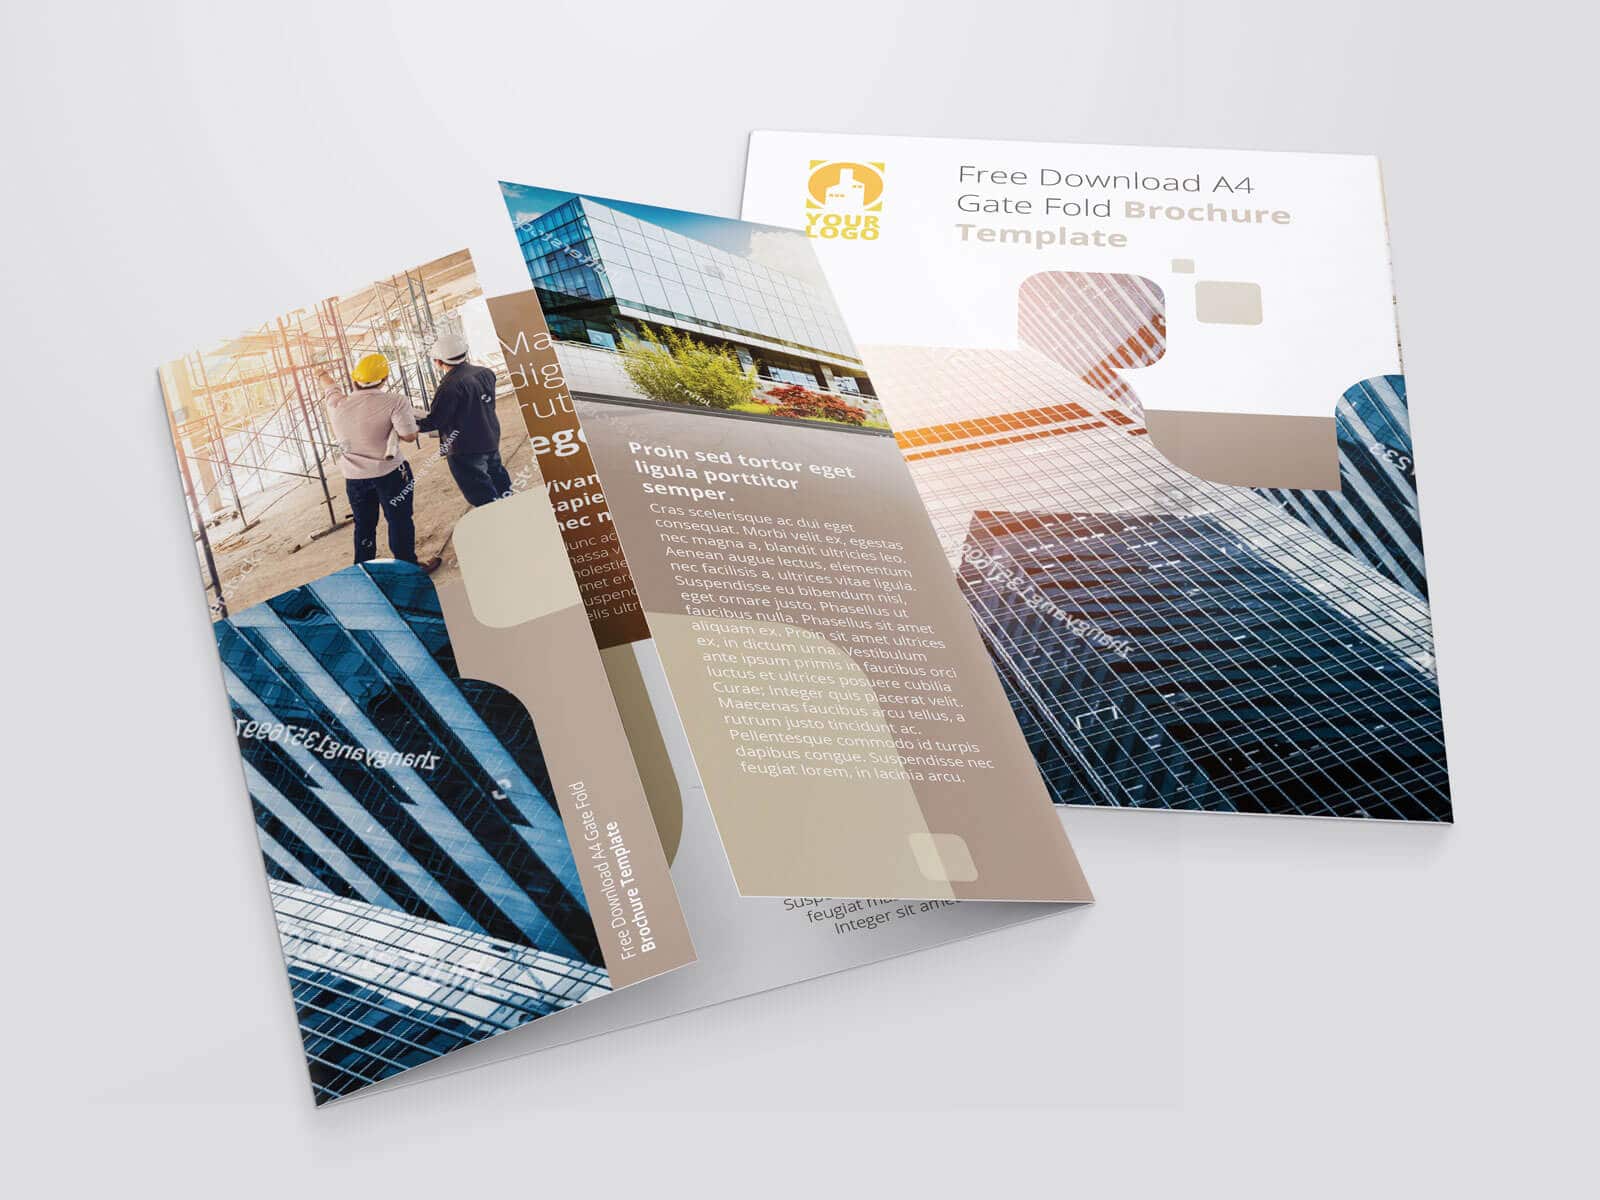 Free Download A20 Gate Fold Brochure Template – Vectogravic Design Within Gate Fold Brochure Template